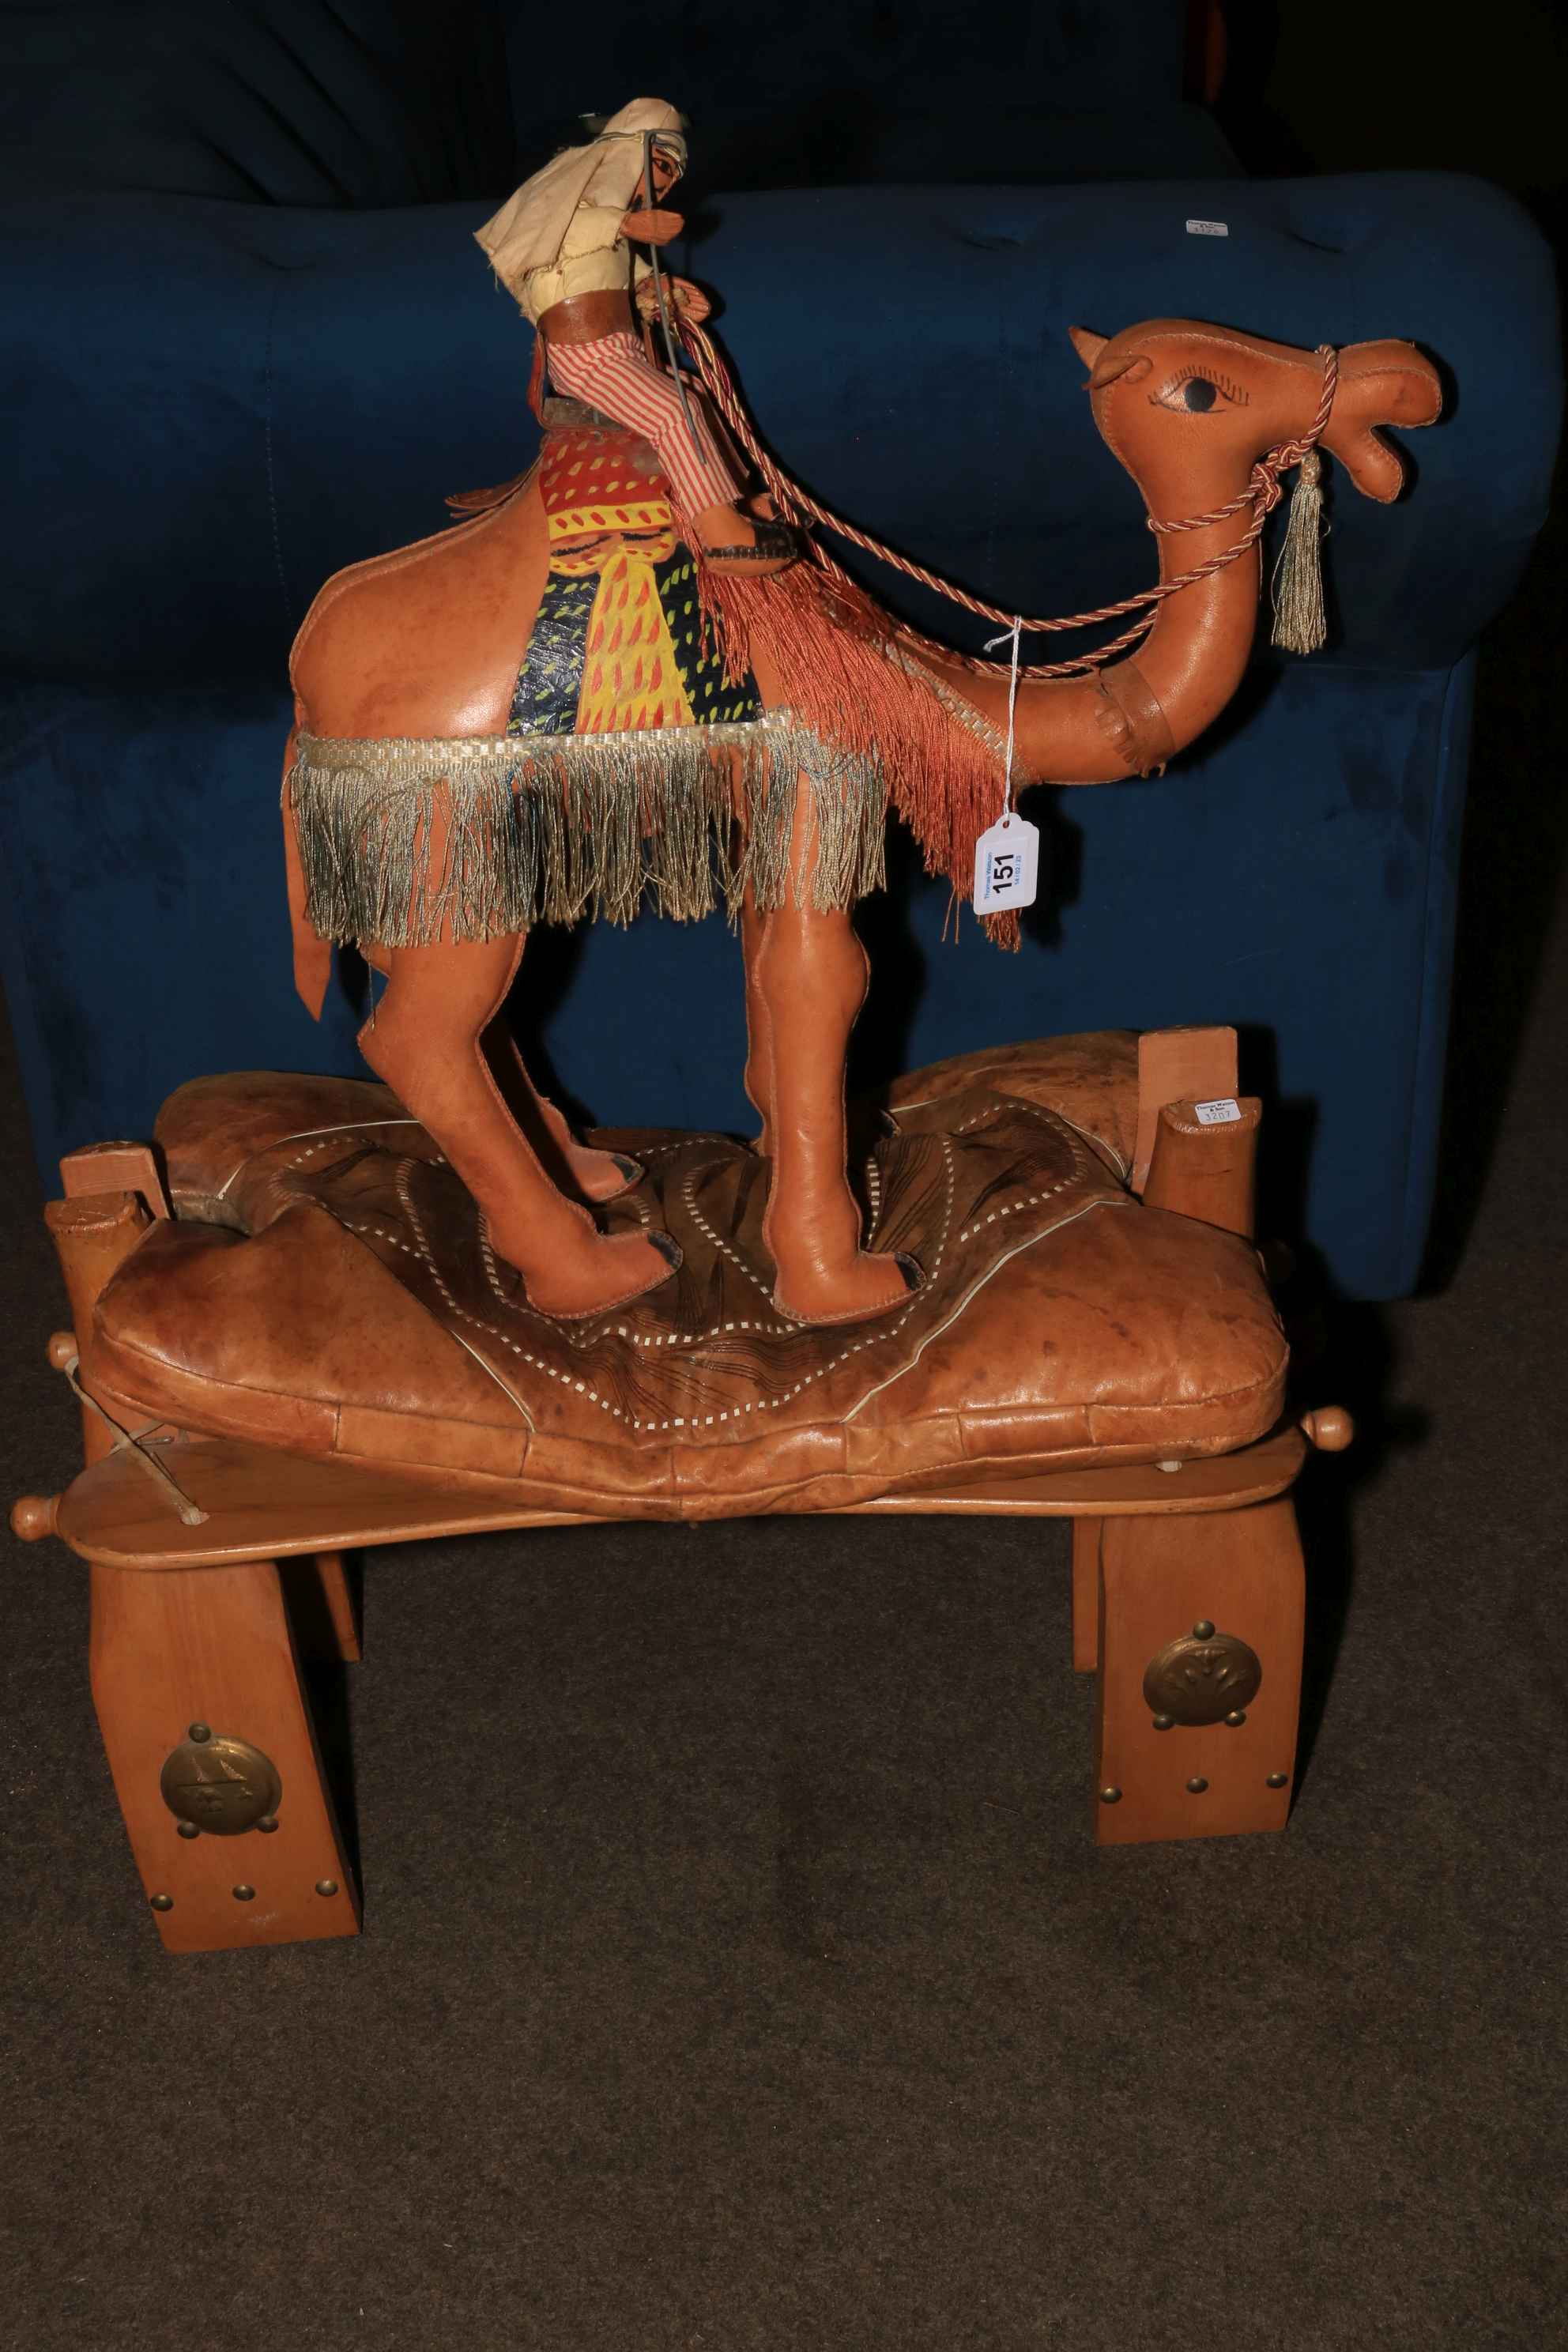 Leather camel and camel stool.